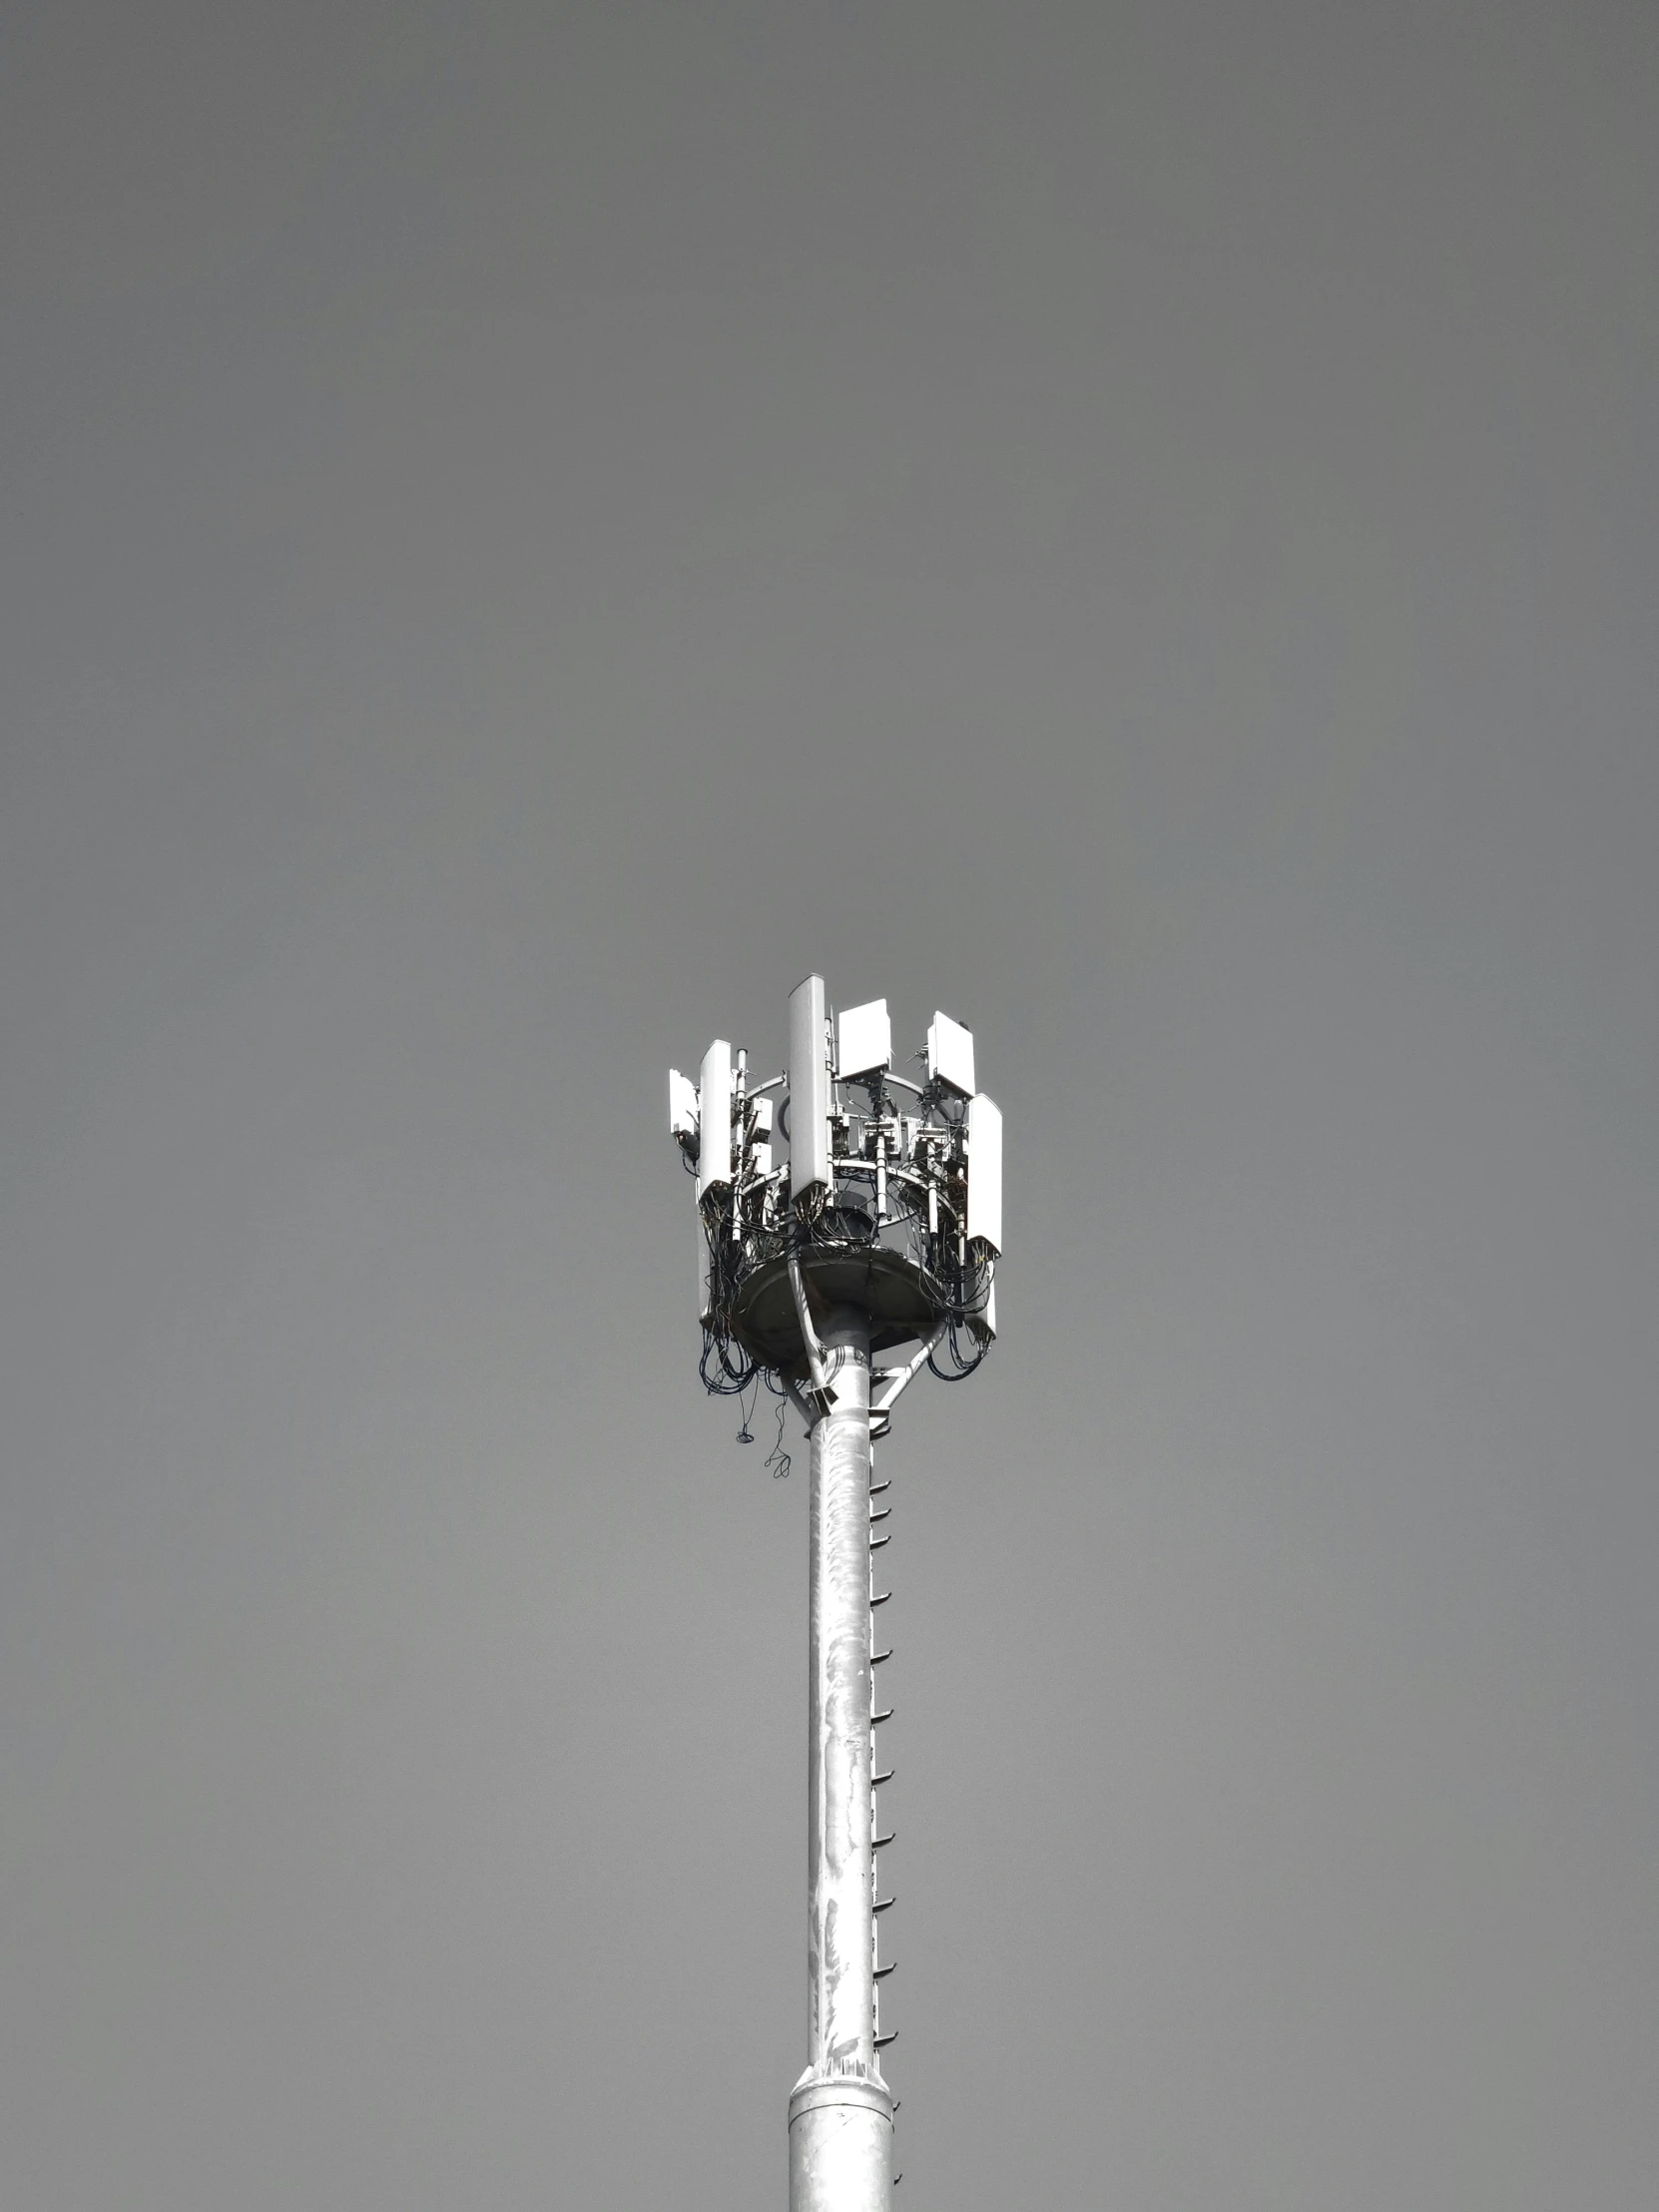 black and white pograph of a tall electronic tower